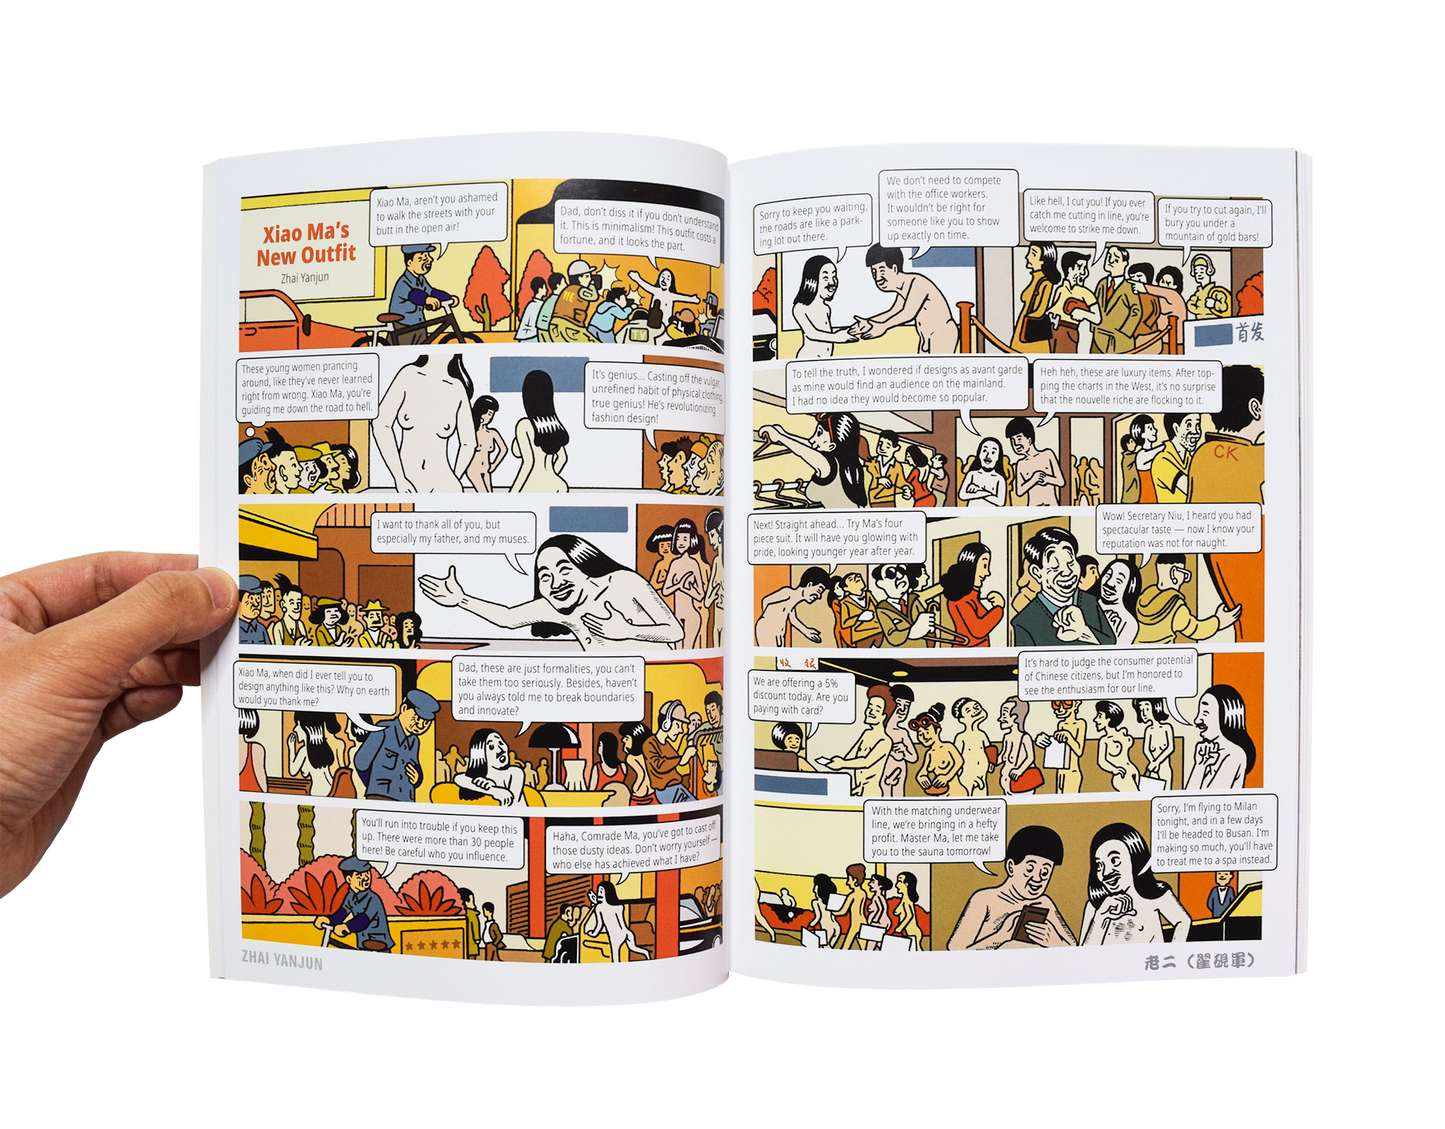 Naked Body: An Anthology of Chinese Comics edited by Yan Cong